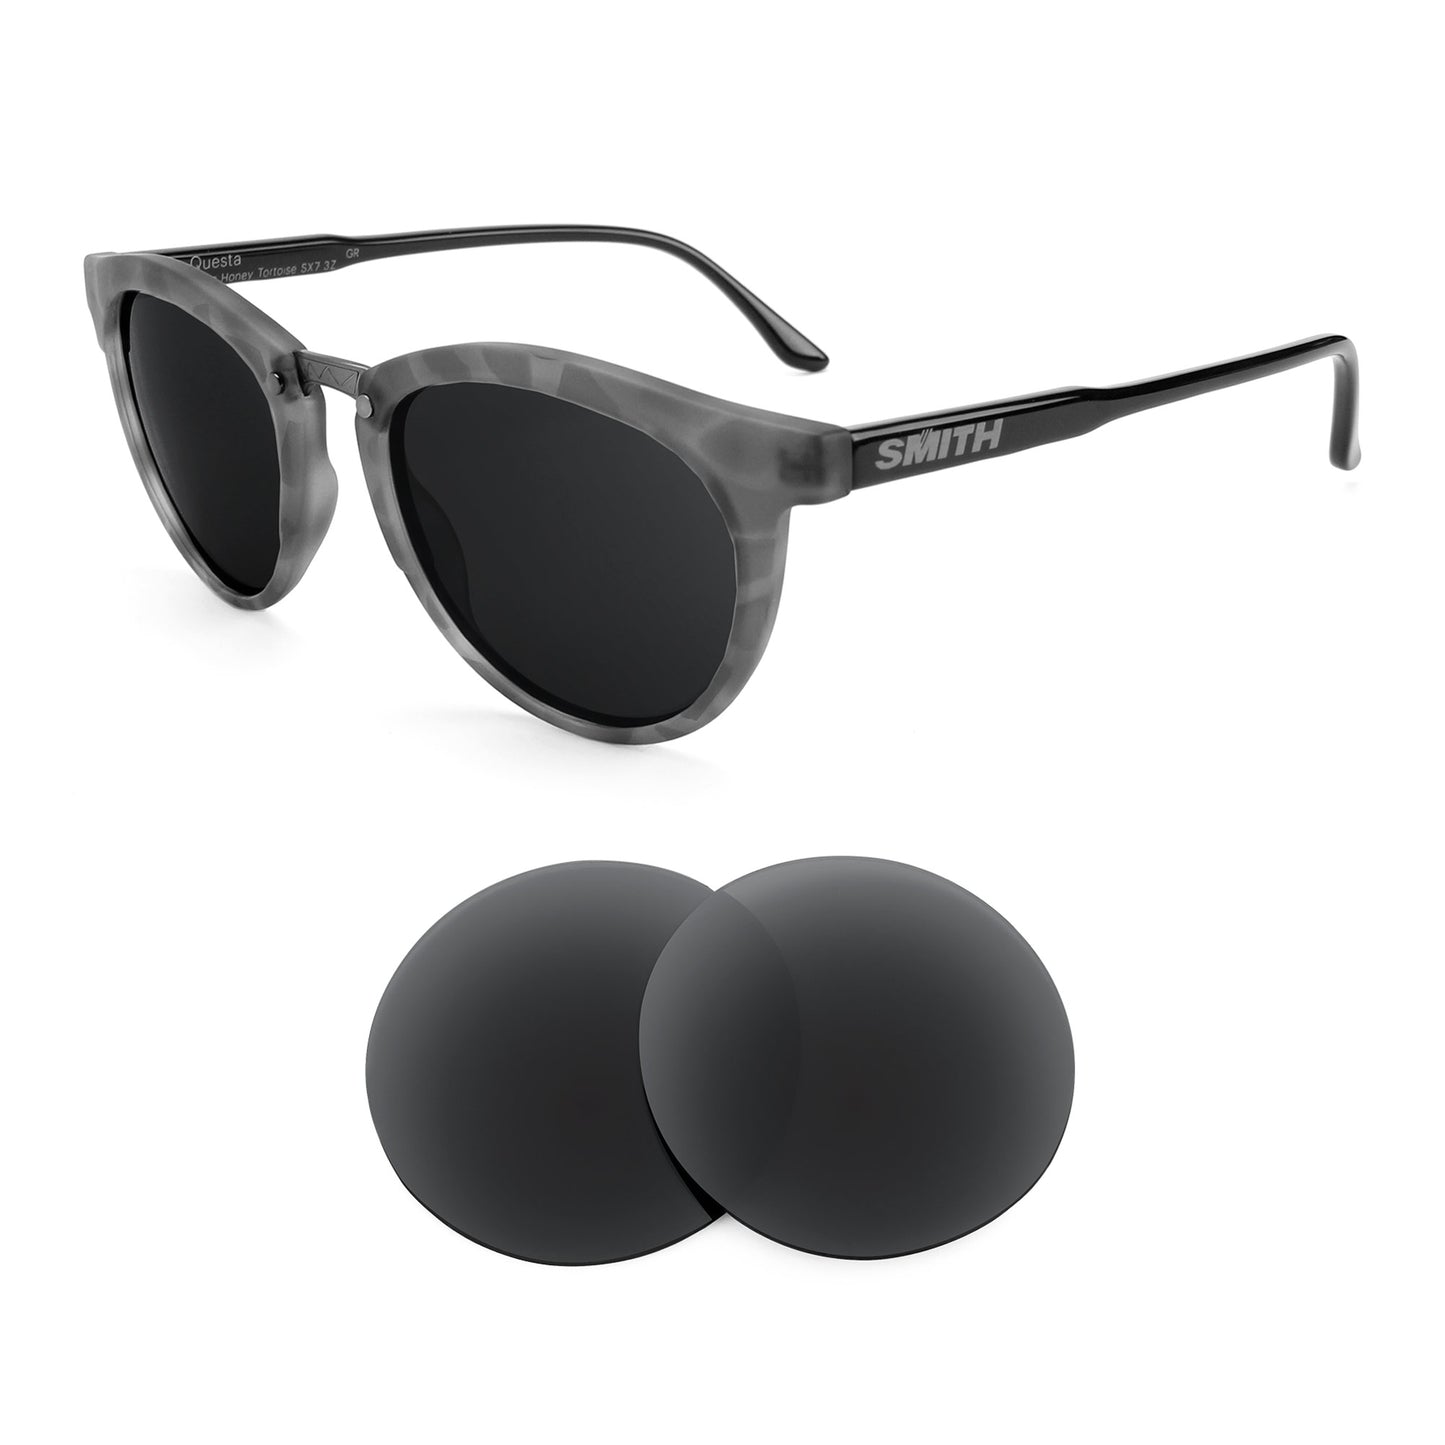 Smith Questa sunglasses with replacement lenses